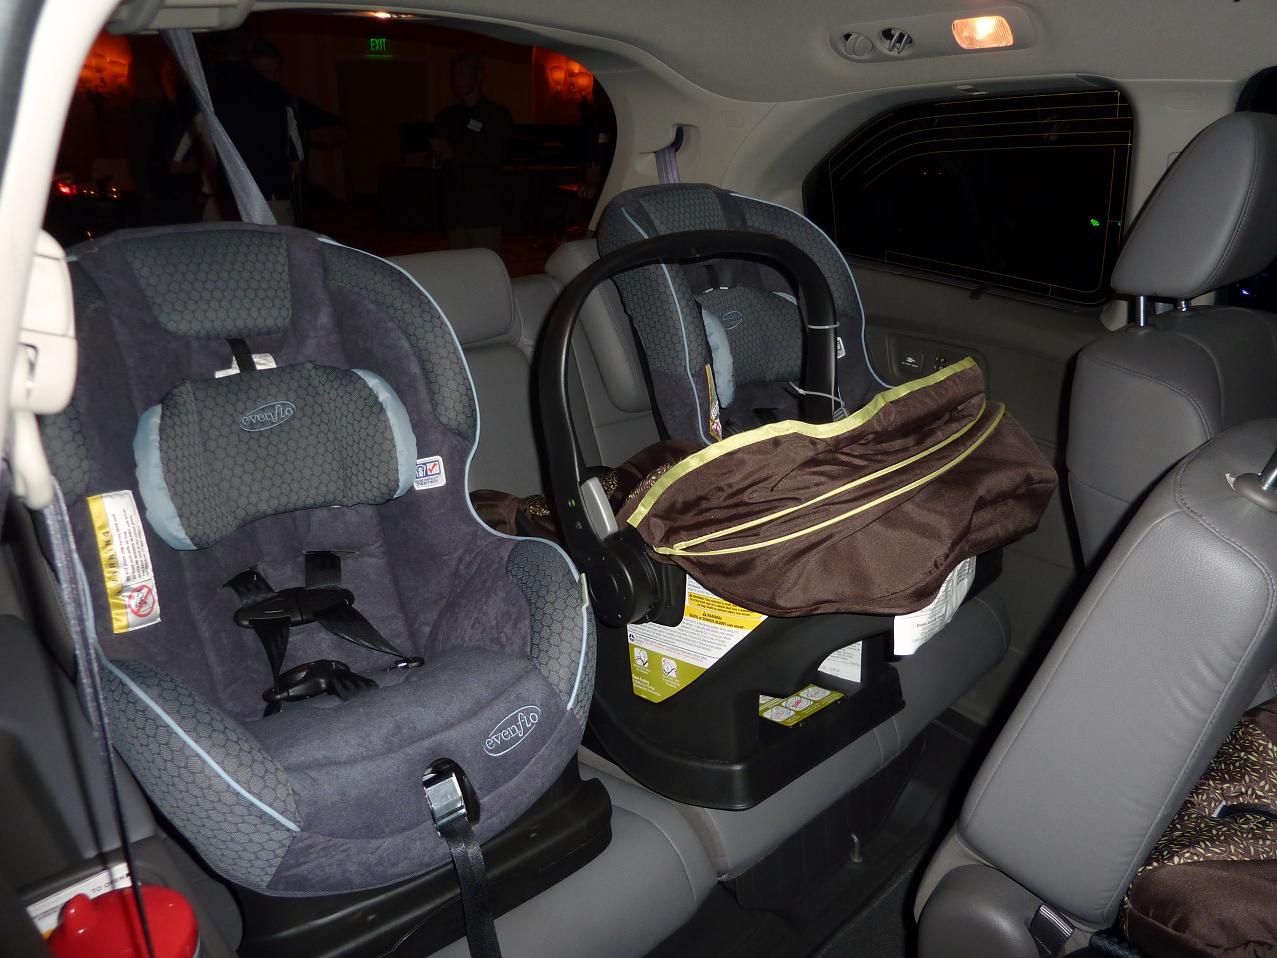 2011 Honda Odyssey First Look Review Part I: Kids, Family and Safety ...